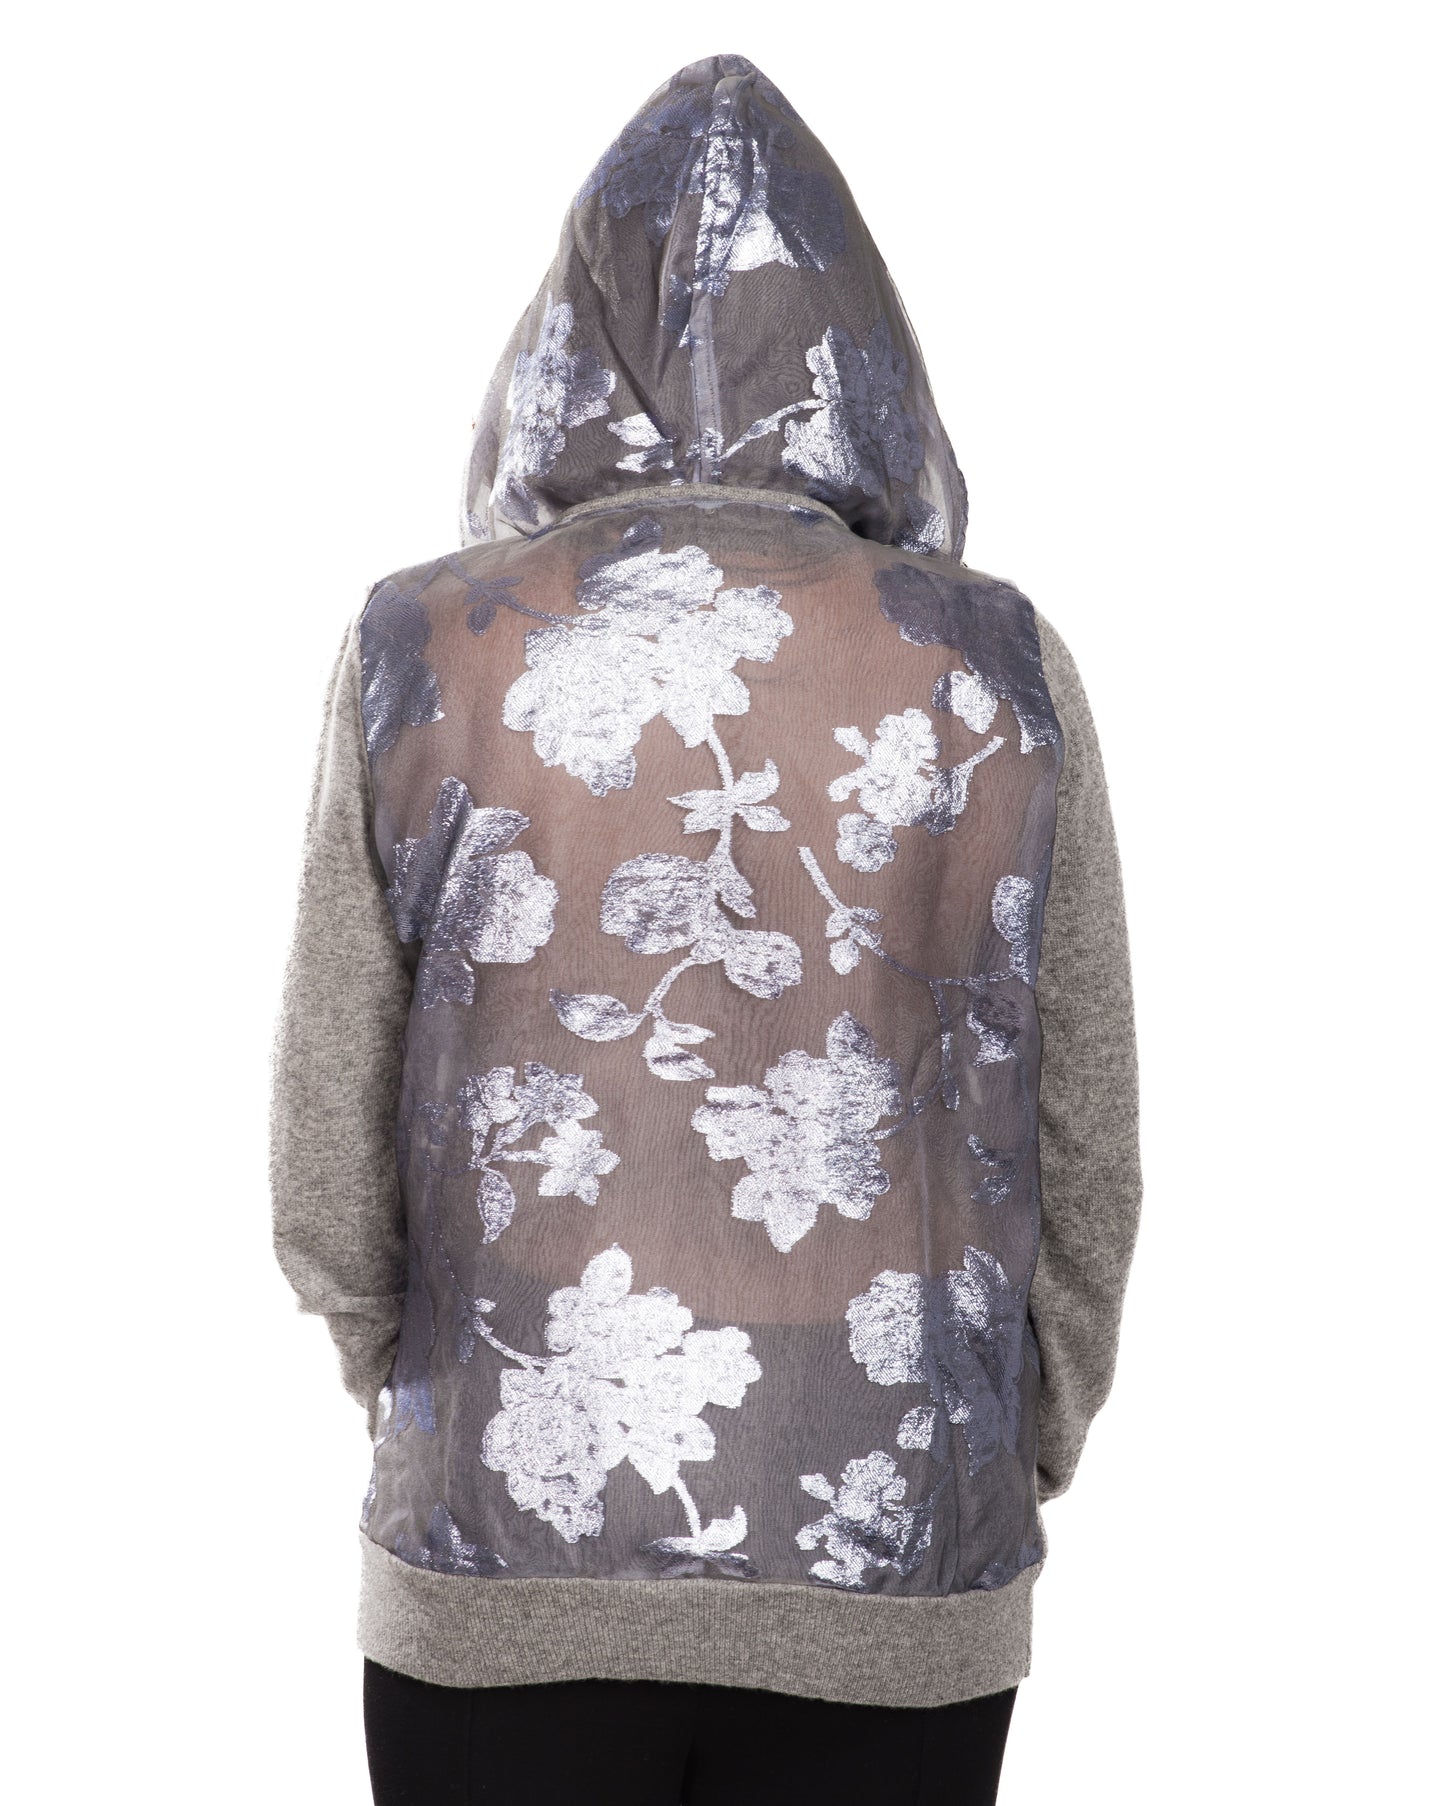 LARGE GREY LONG SLEEVE CASHMERE HOODIE WITH SPRING LAVENDER PLATINUM JACQUARD FLORAL ON CLOUDY DAY SILK ORGANZA BACK AND HOOD DETAIL WITH CLOUDY DAY SILK ORGANZA LINING